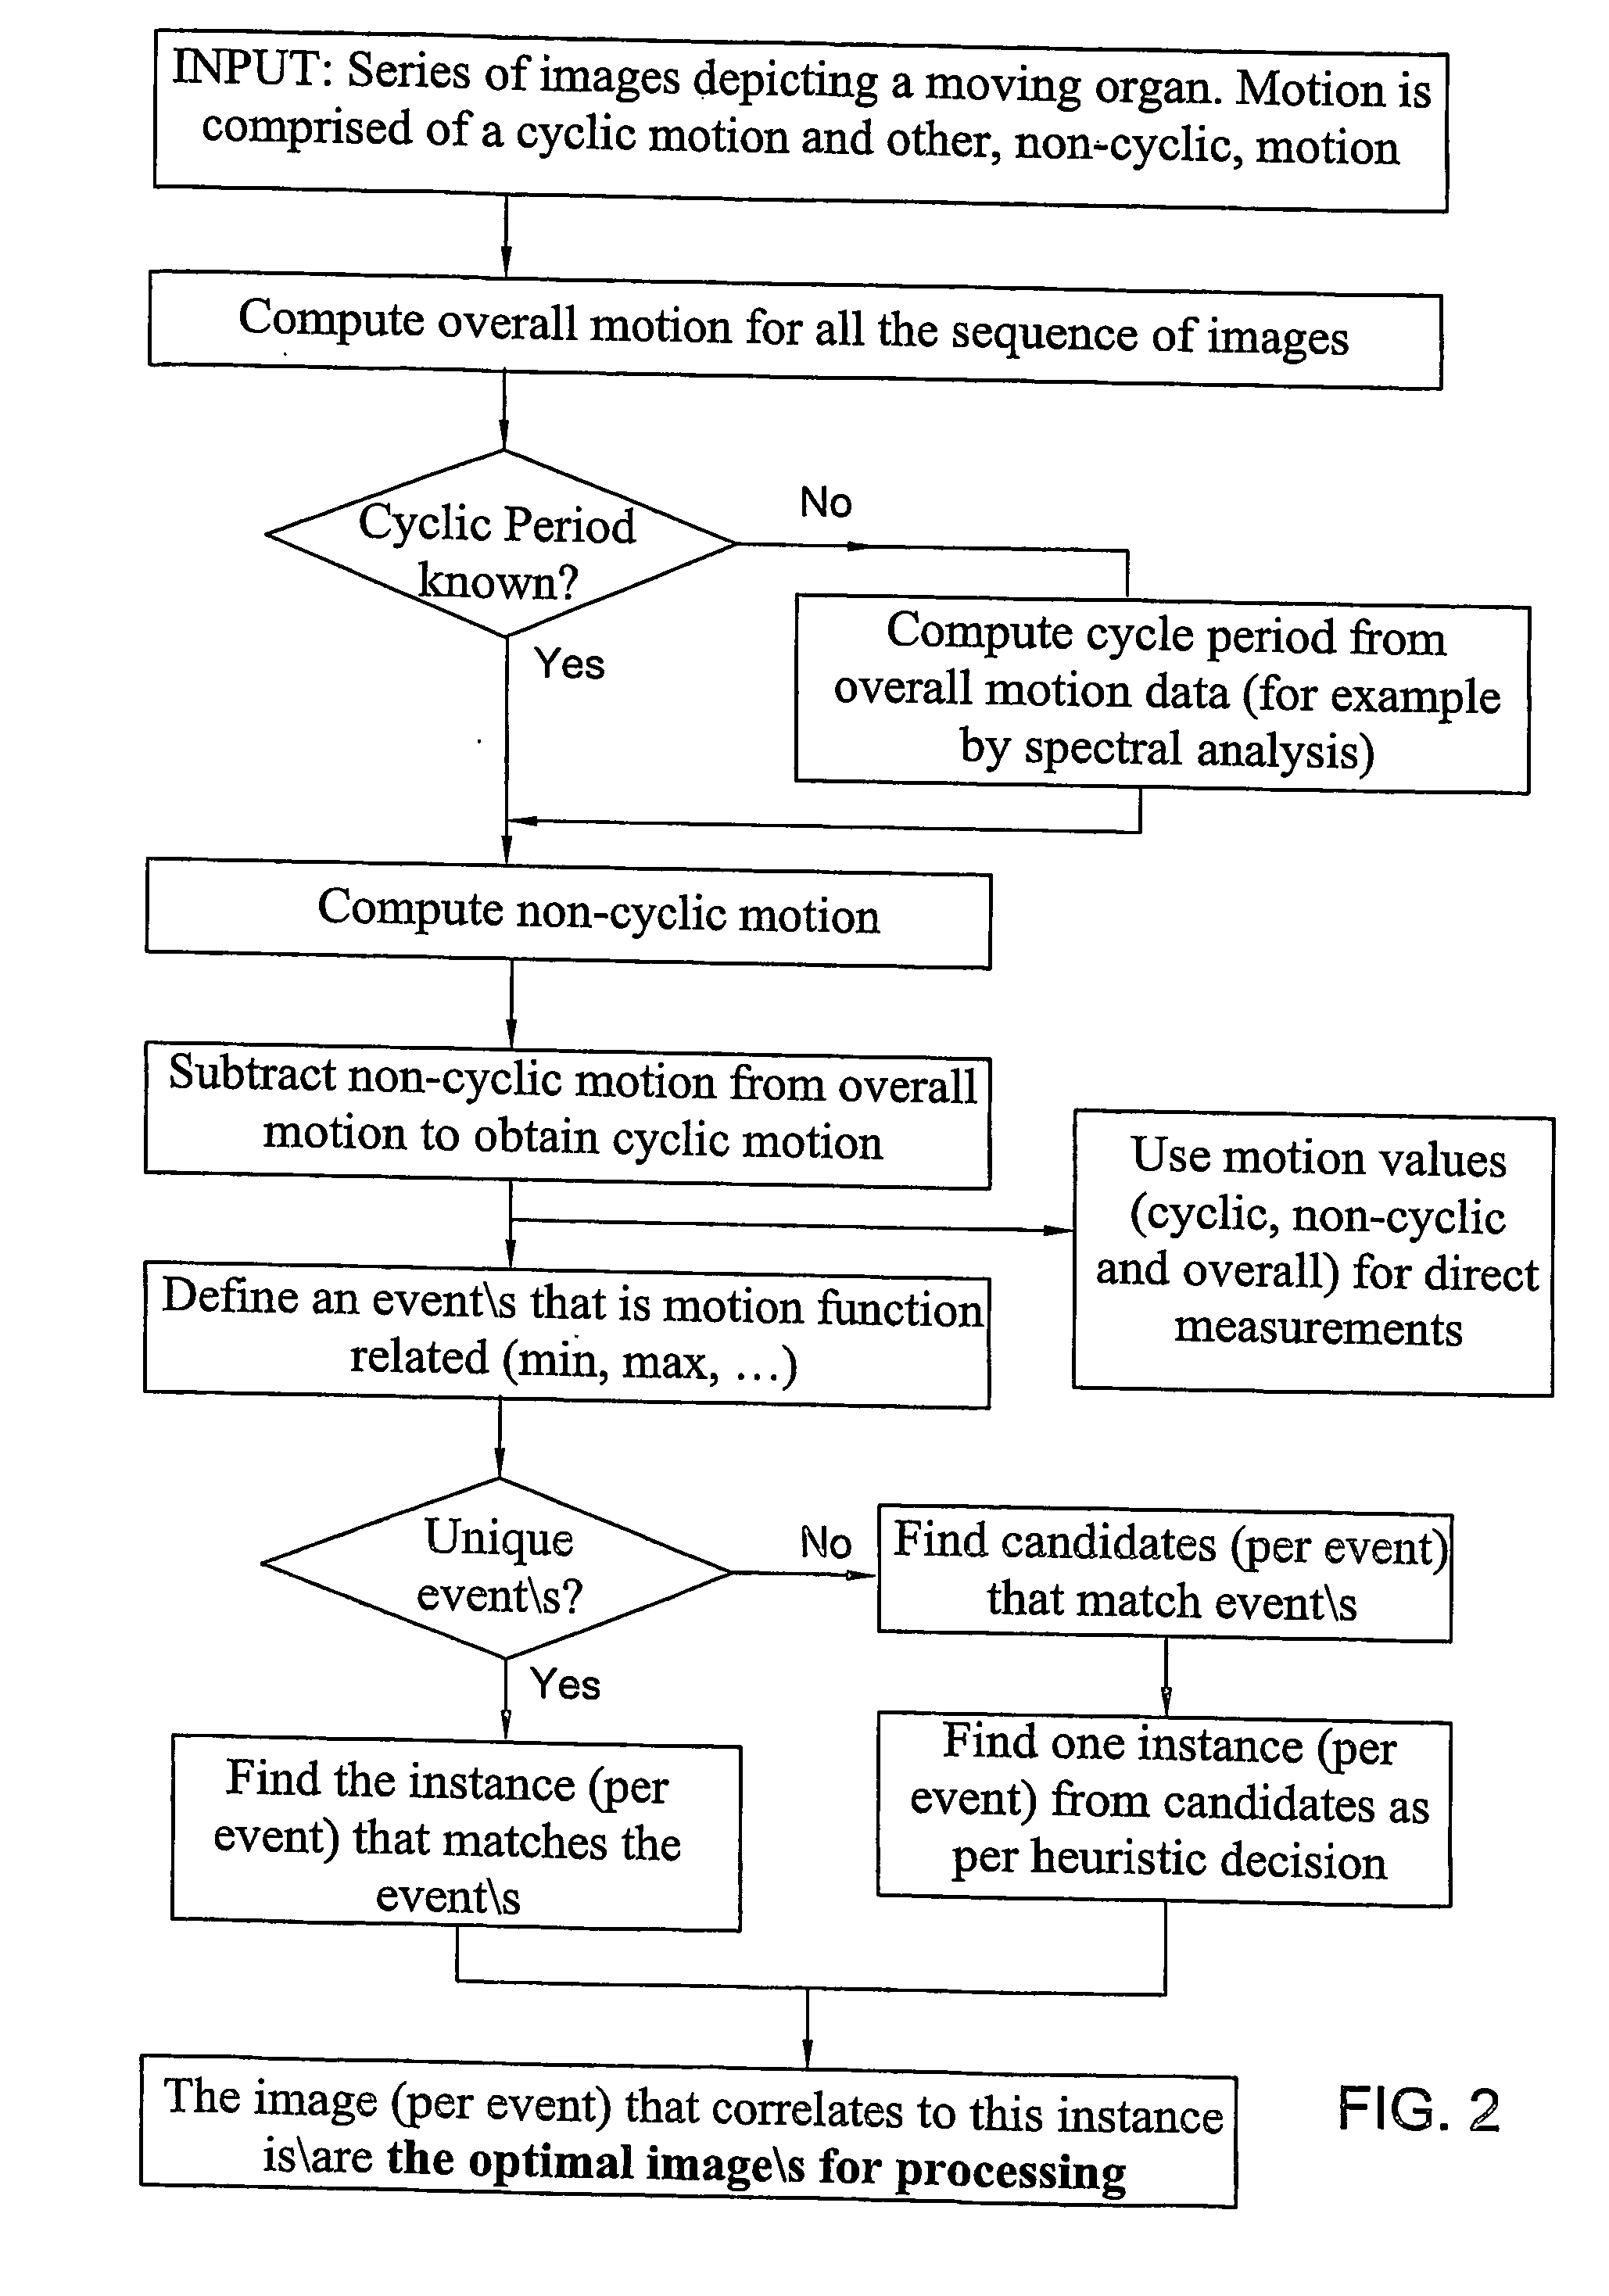 Method and system for identifying optimal image within a series of images that depict a moving organ